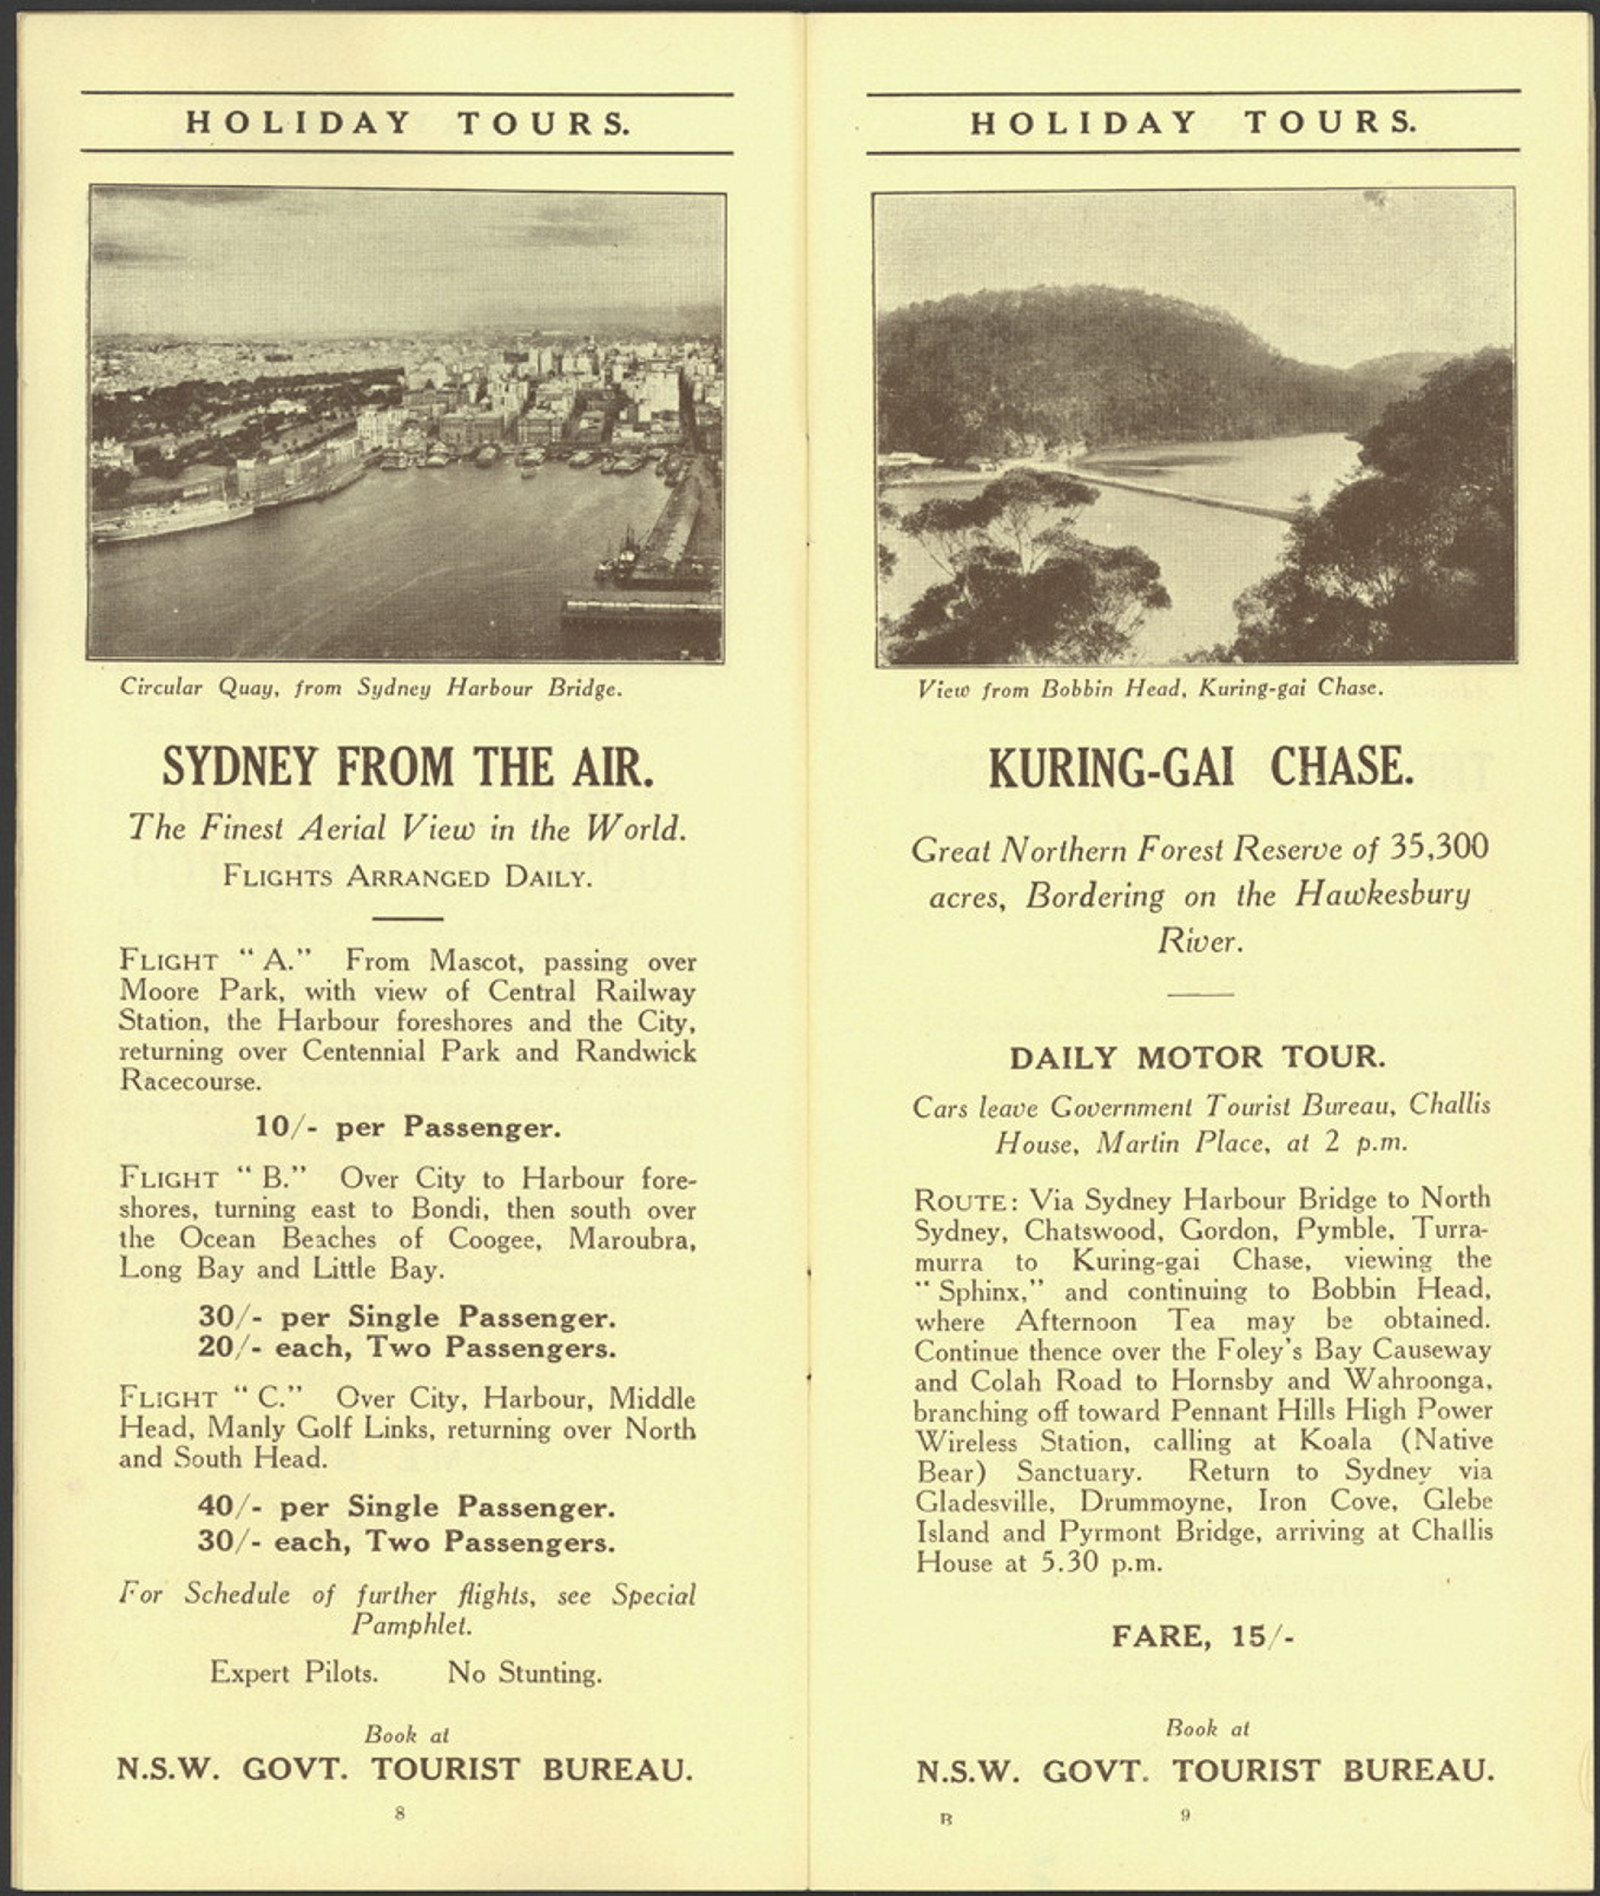 Pages 8 - Sydney from the air, finest aerial view in the world. Circular Quay from SHB. Page 9 - Kuring-Gai Chase, great northern forest of 35,000 acres, bordering on Hawkesbury River. View from Bobbin Head, Kuring-gai Chase. ID 16410_a111_11a_000022_p8-9